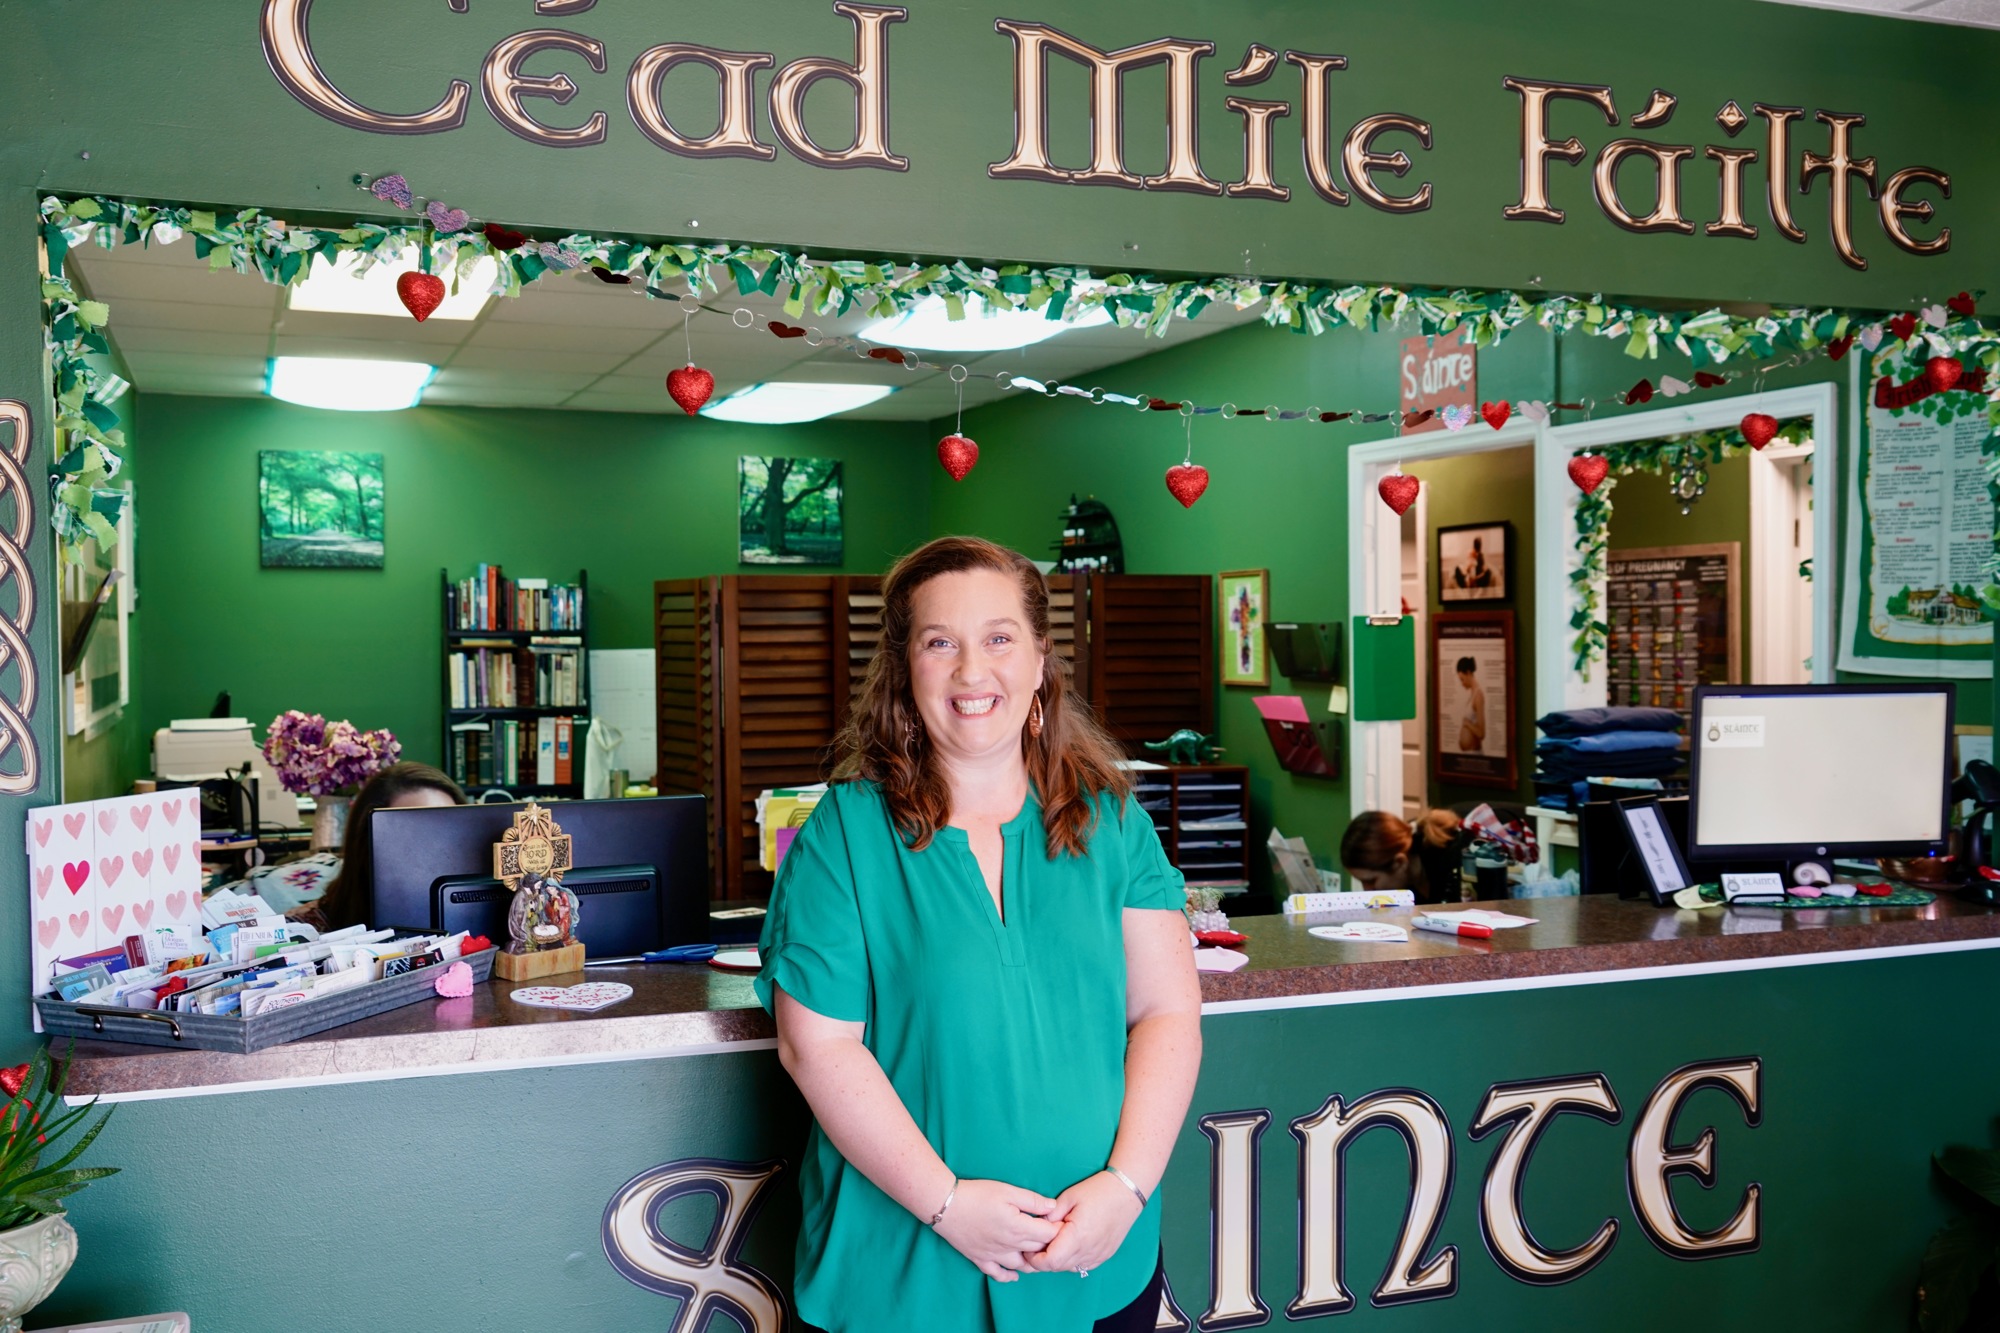 Dr. Bridget Edkin in her Jacksonville Beach office.  The inscription “Cead Mile Failte” means “a hundred thousand welcomes” and “Sláinte” is a toast to good health in Ireland and Scotland.